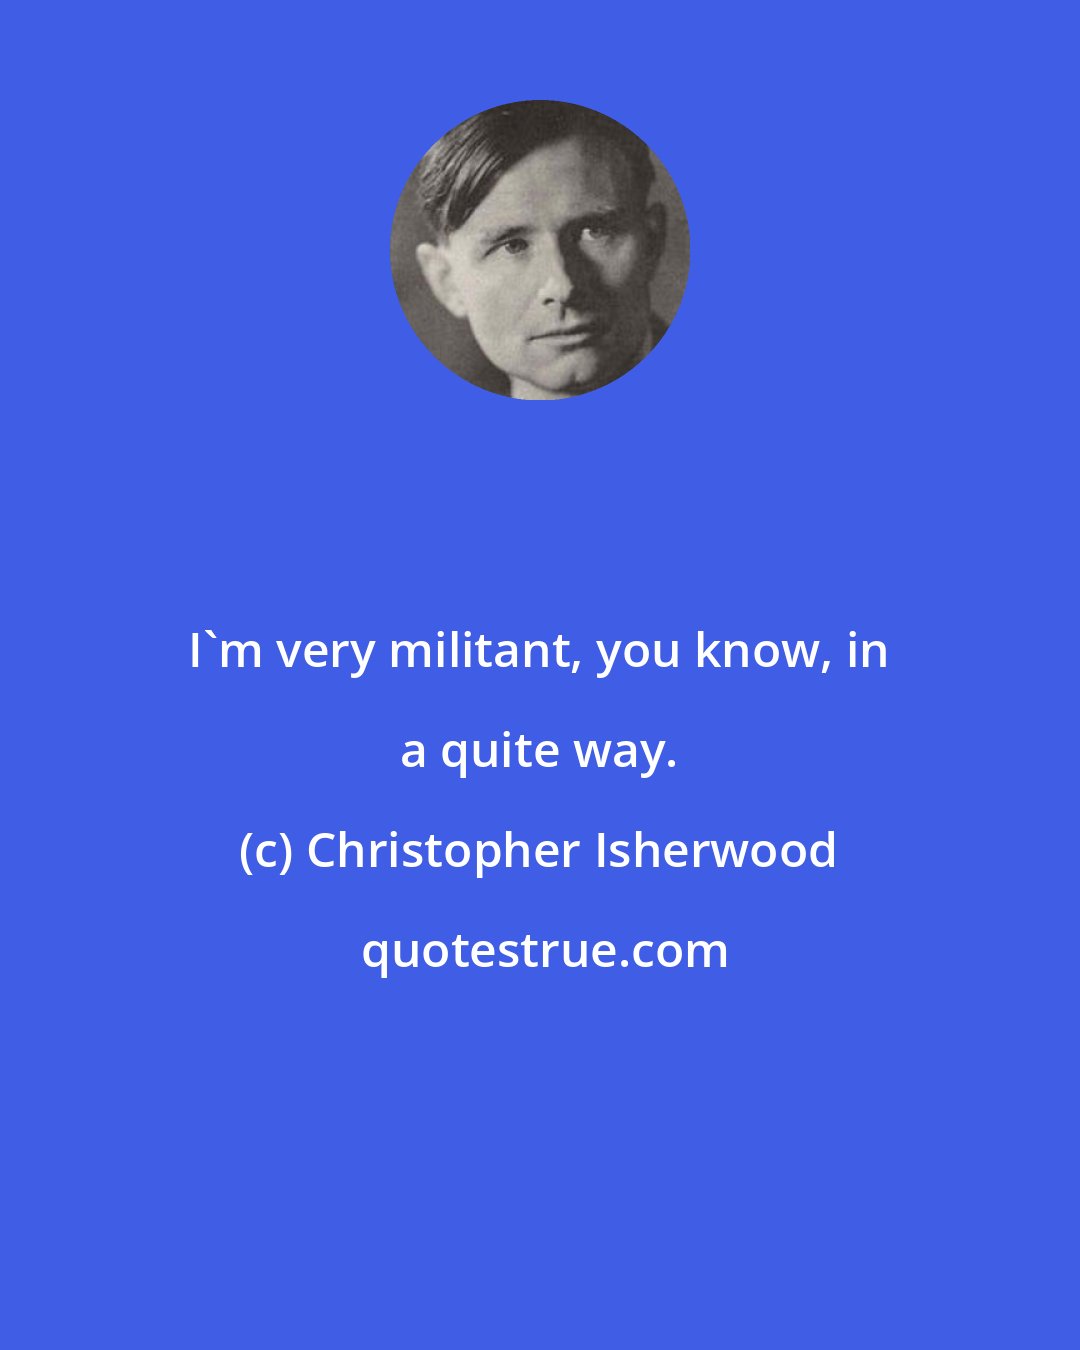 Christopher Isherwood: I'm very militant, you know, in a quite way.